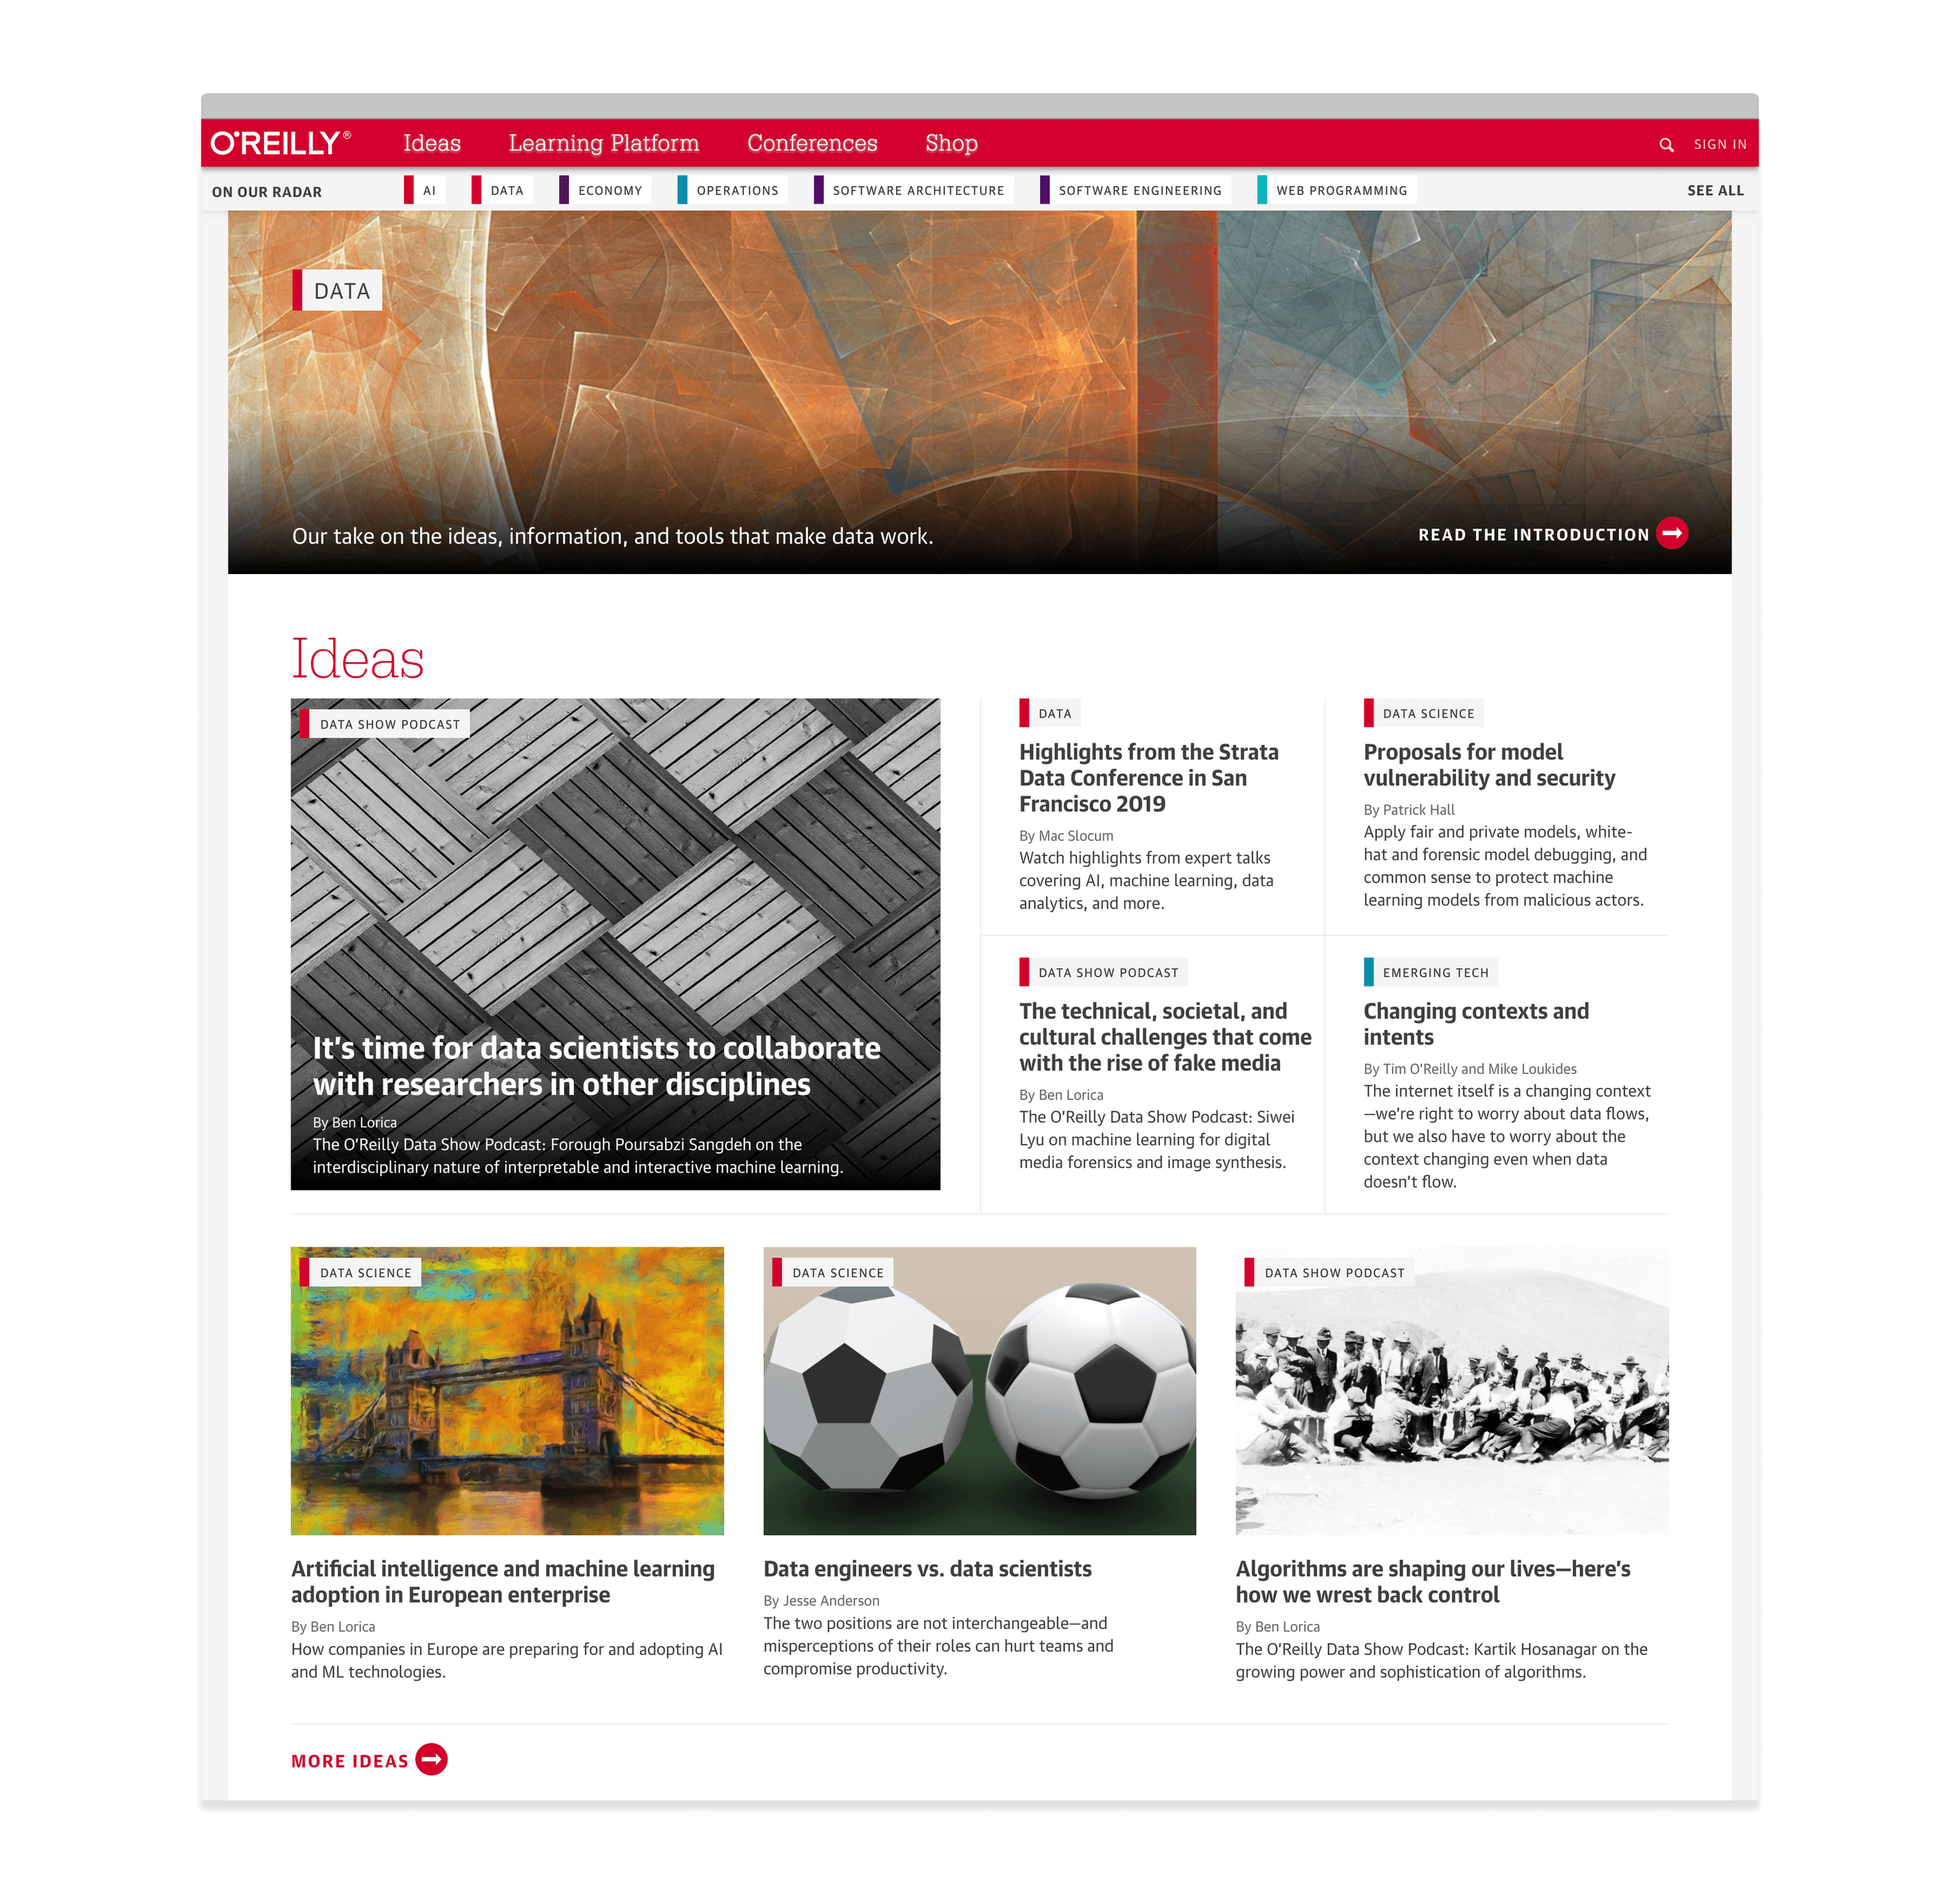 The new website launched with a curated set of topic pages.